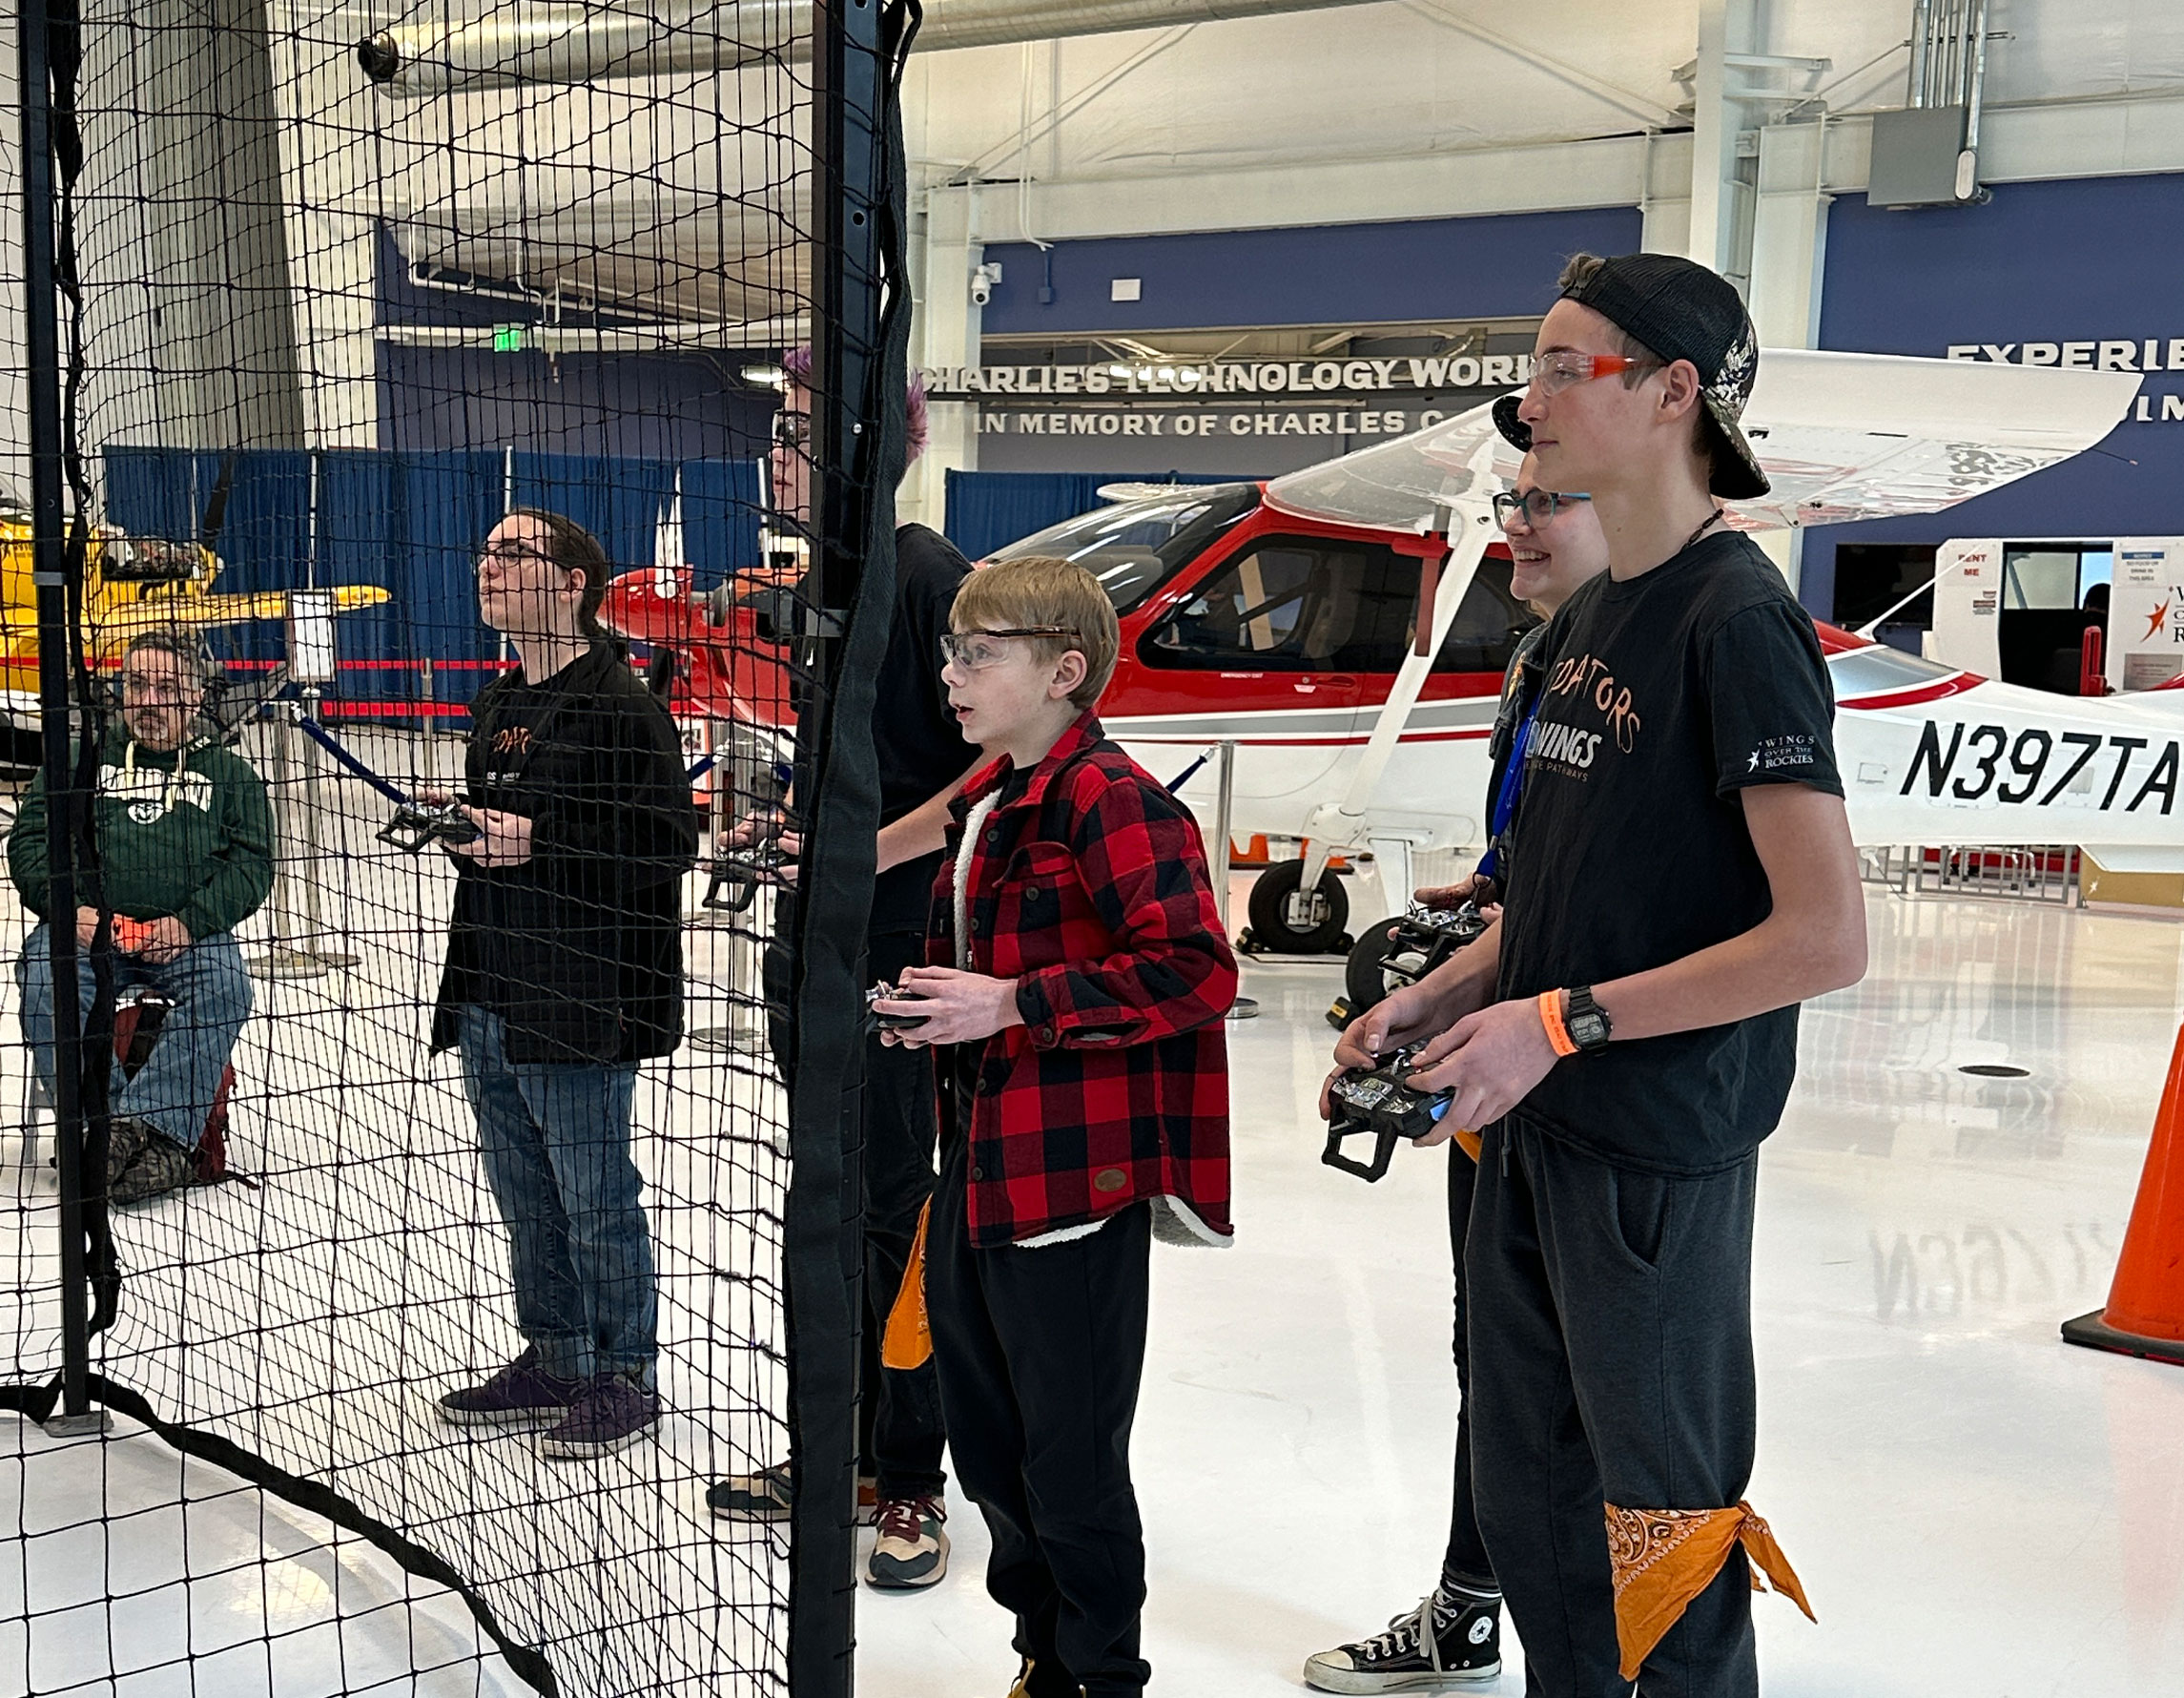 Students playing drone soccer